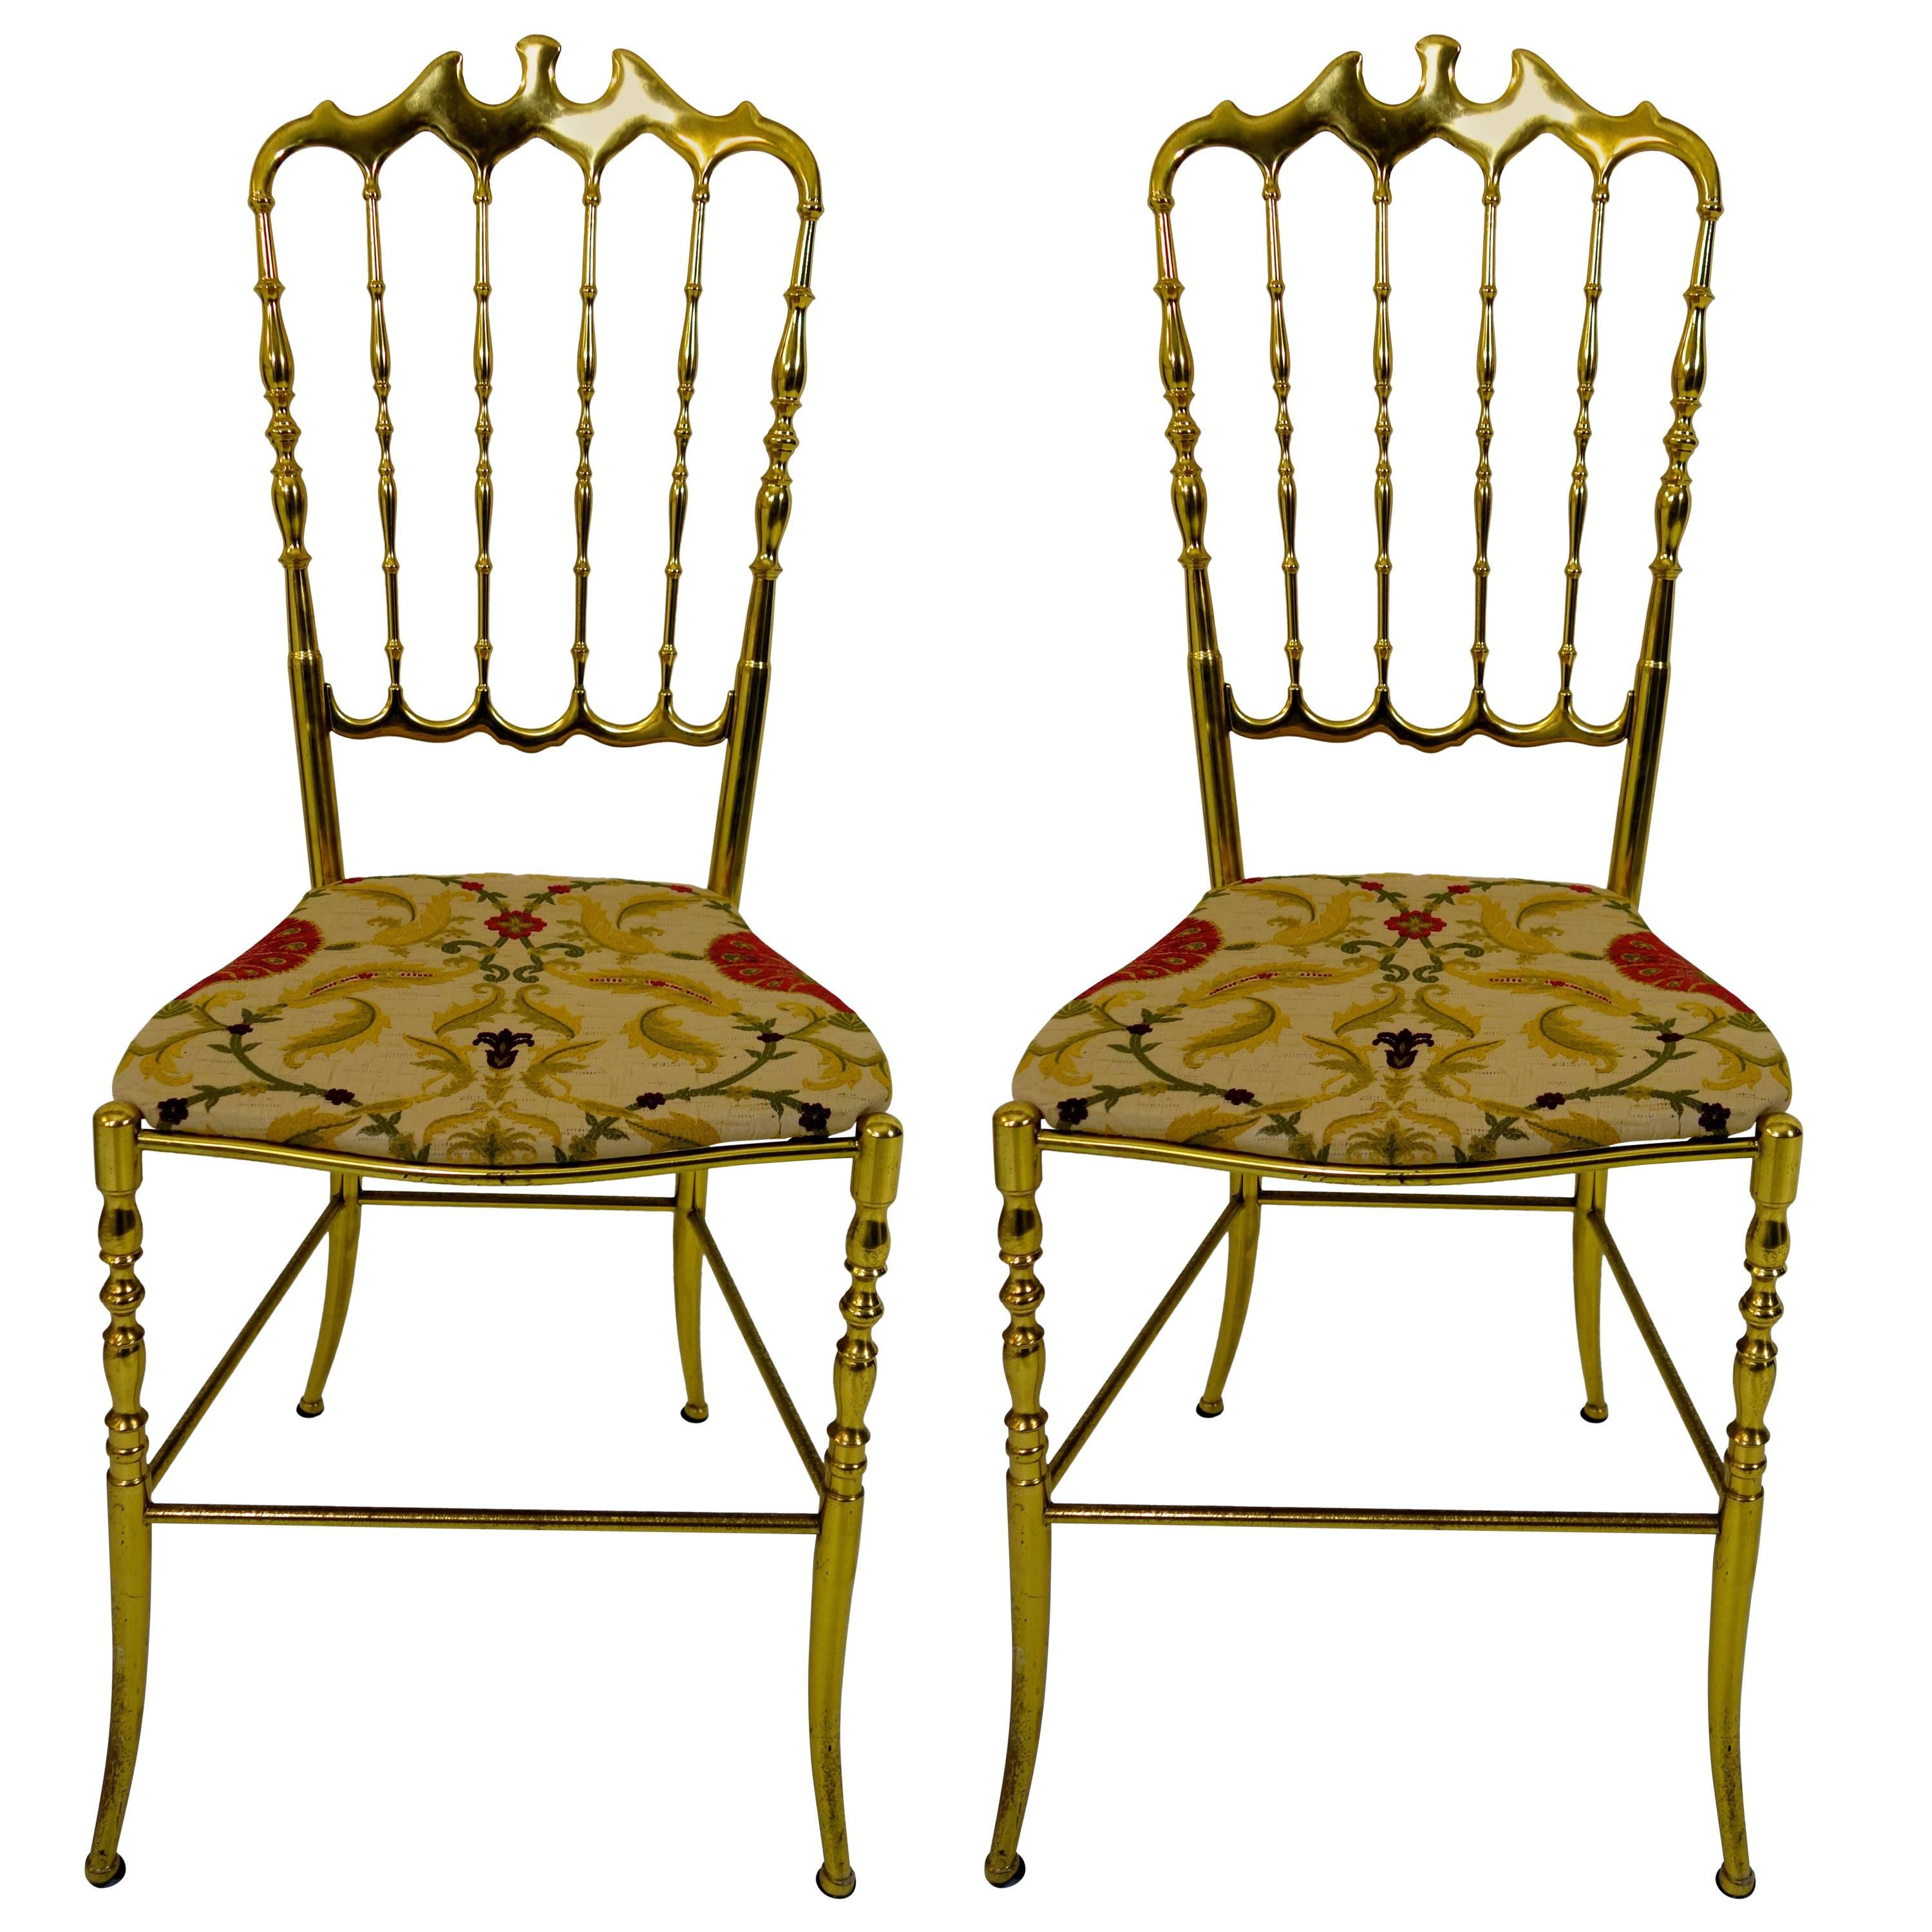 Pair of two Shiny Brass Chairs in Hollywood Regency style made by Chiavari